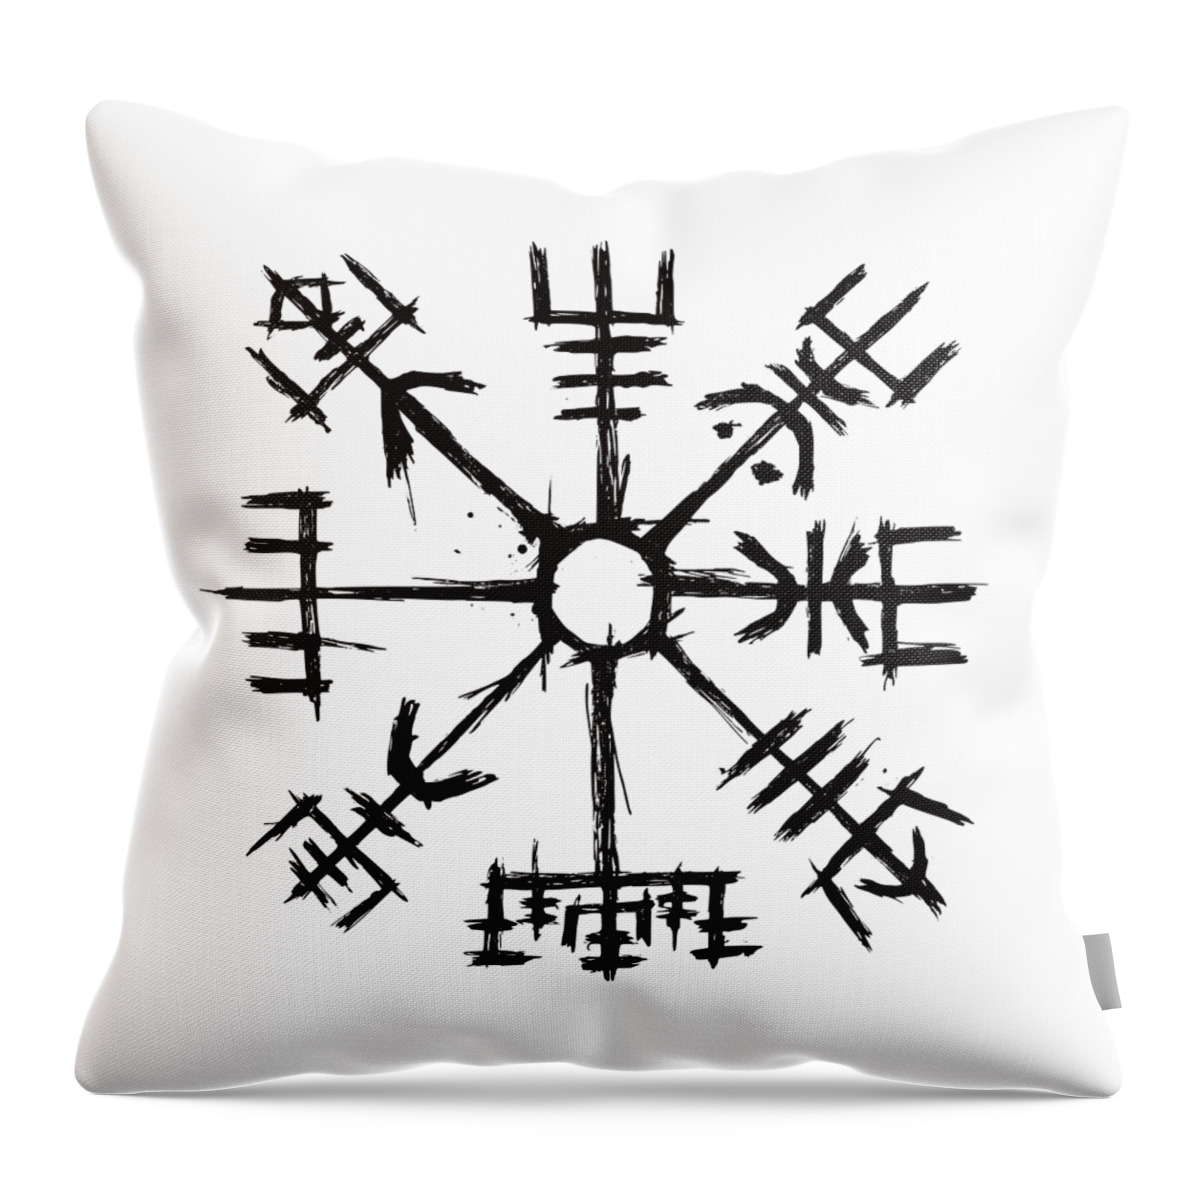 Norse Mythology Throw Pillow featuring the drawing Viking Compass Vegvisir by Beltschazar